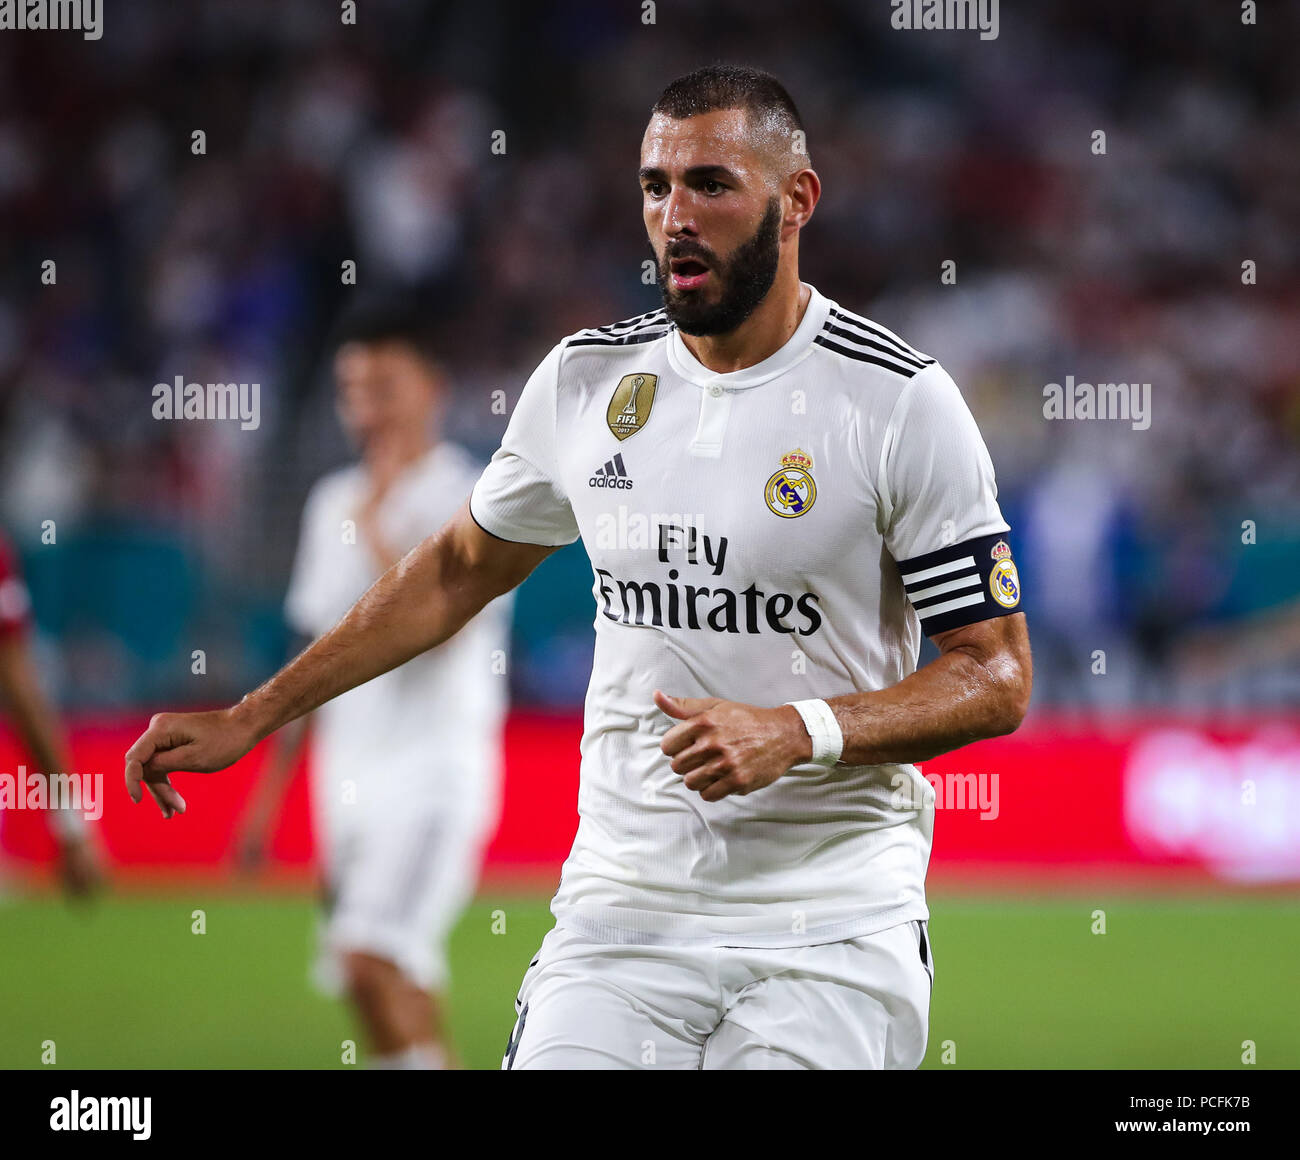 Miami Gardens, Florida, USA. 31st July, 2018. Real Madrid C.F. forward Karim Mostafa Benzema (9) in action during an International Champions Cup match between Real Madrid C.F. and Manchester United F.C. at the Hard Rock Stadium in Miami Gardens, Florida. Manchester United F.C. won the game 2-1. Credit: Mario Houben/ZUMA Wire/Alamy Live News Stock Photo